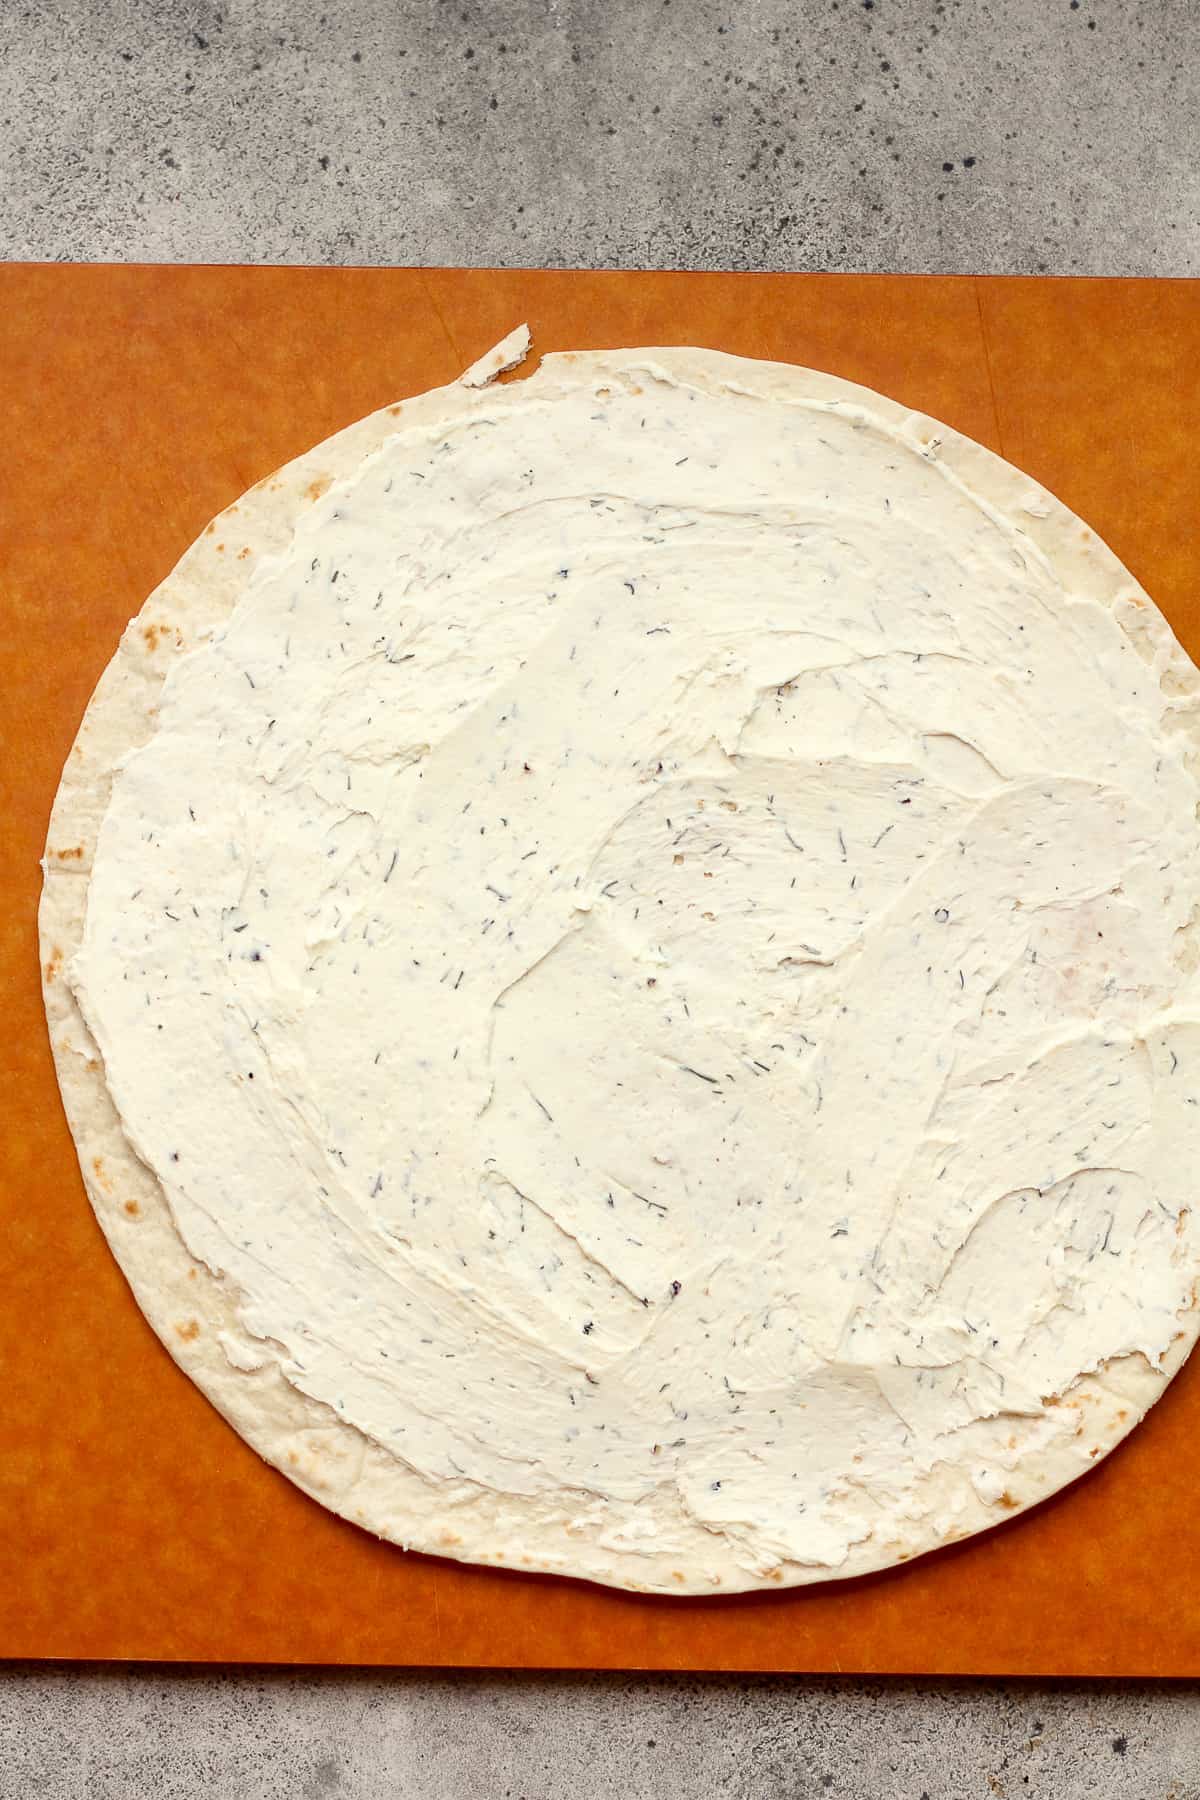 A large tortilla spread with cream cheese and seasonings.